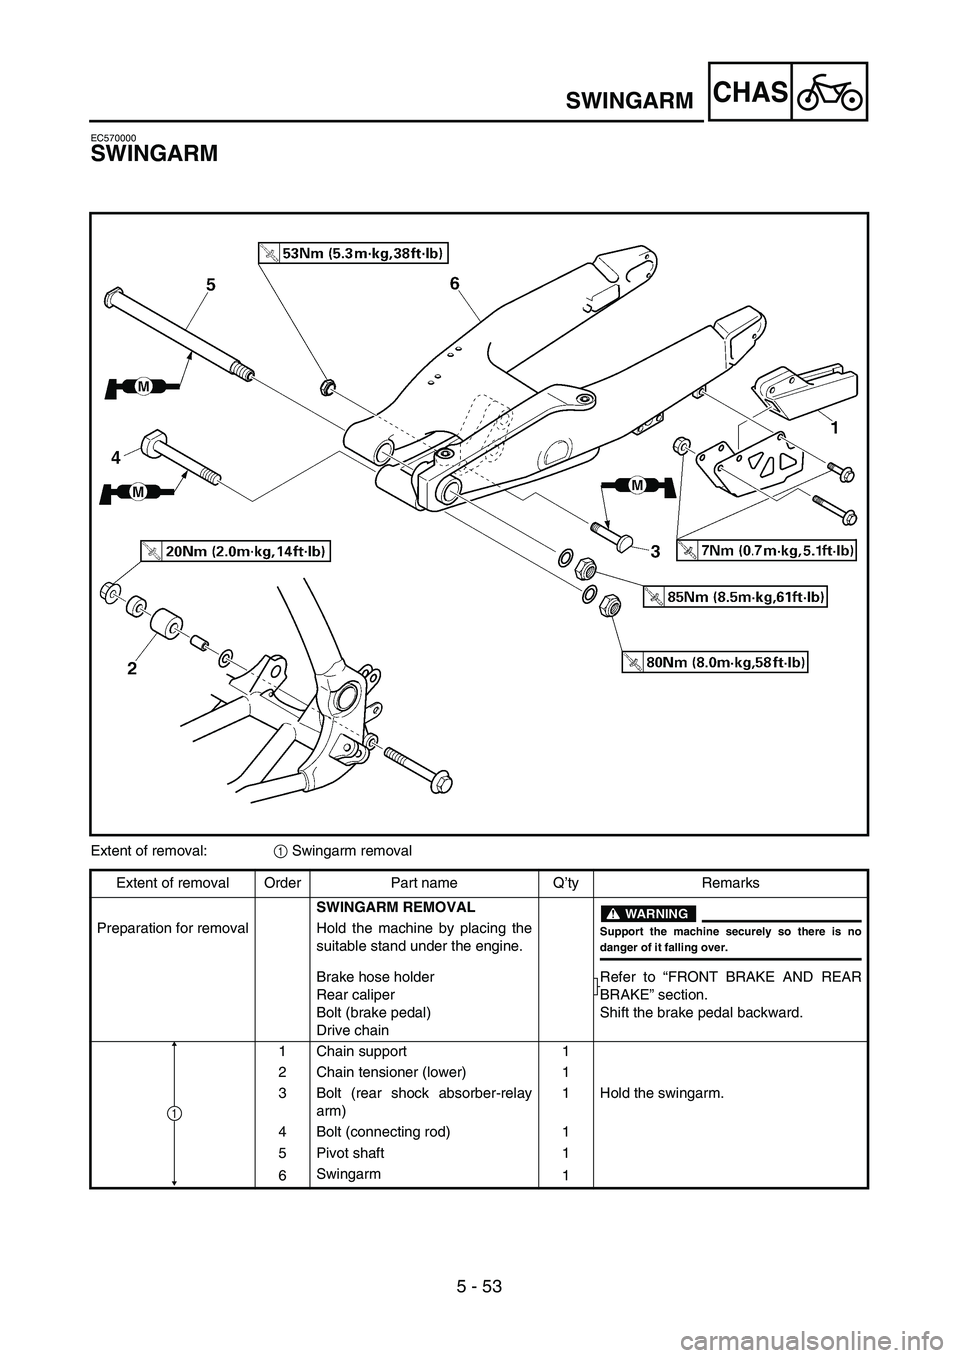 YAMAHA WR 400F 2002  Manuale de Empleo (in Spanish) 5 - 53
CHASSWINGARM
EC570000
SWINGARM
Extent of removal:1 Swingarm removal
Extent of removal Order Part name Q’ty Remarks
SWINGARM REMOVAL
WARNING
Support the machine securely so there is no
danger 